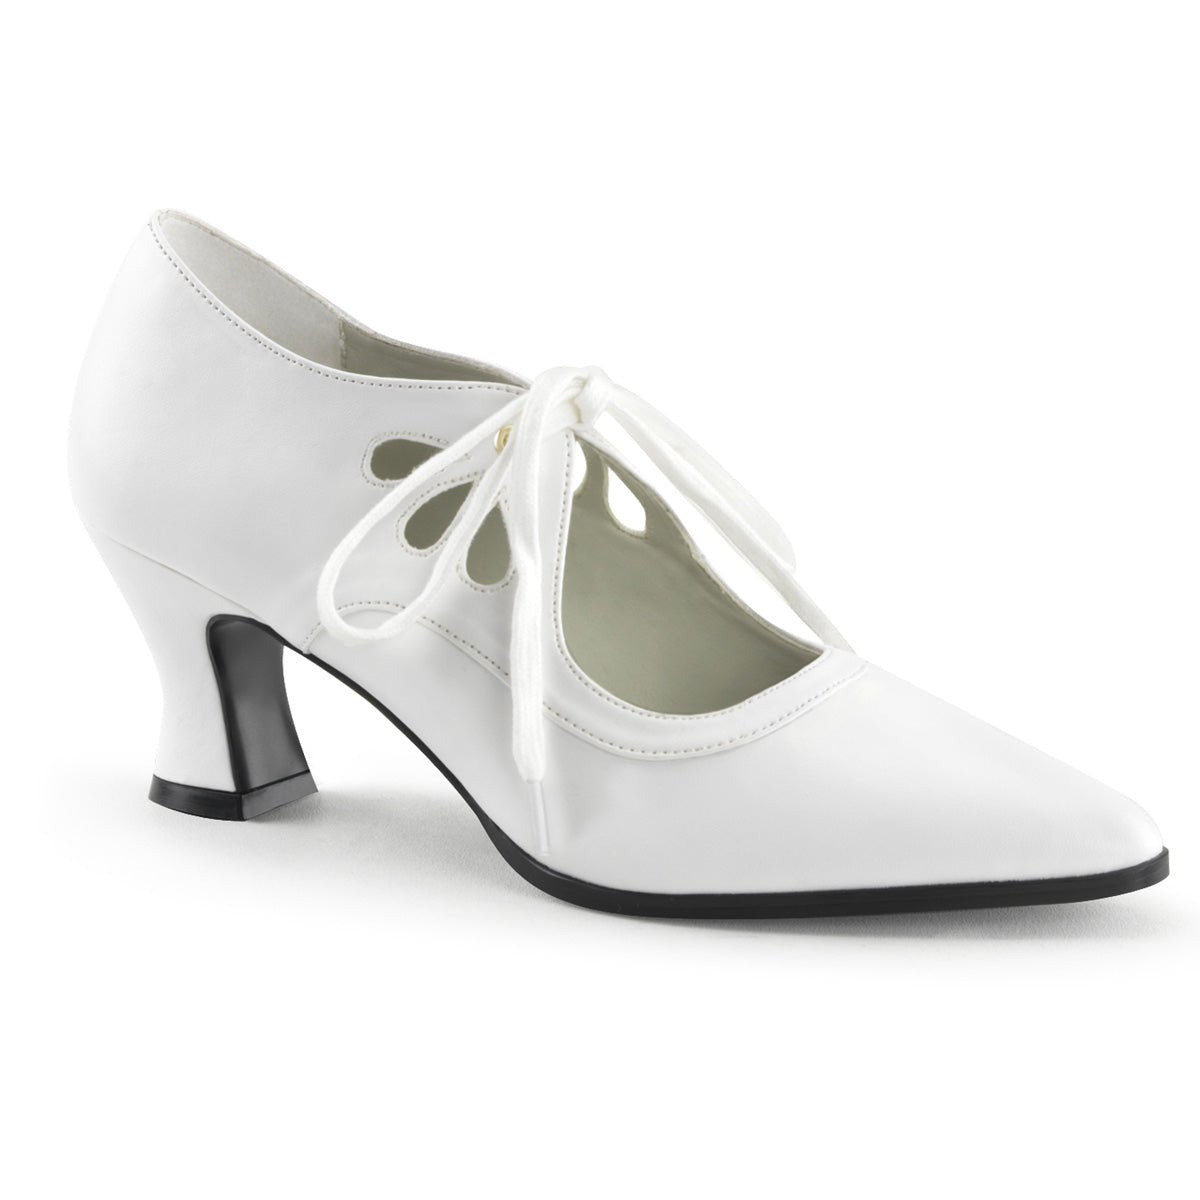 Clearance Funtasma Victorian 03 White Size 4UK/7USA - From Clearance Sold By Alternative Footwear